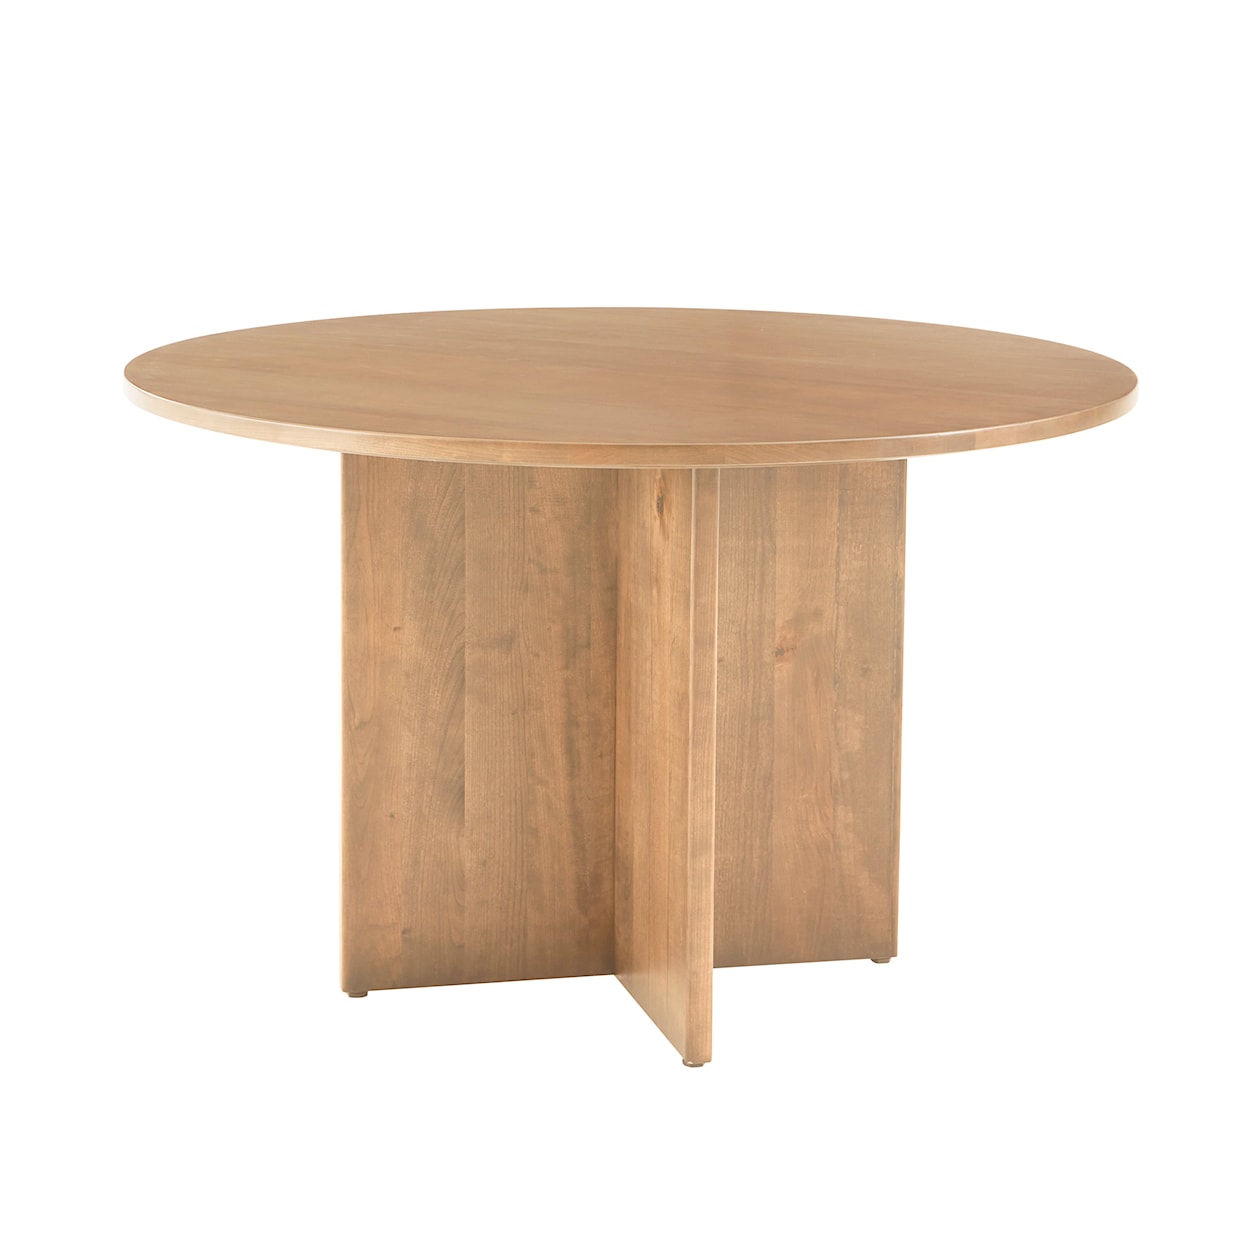 Vaughan Bassett Crafted Cherry - Bleached Round Dining Table